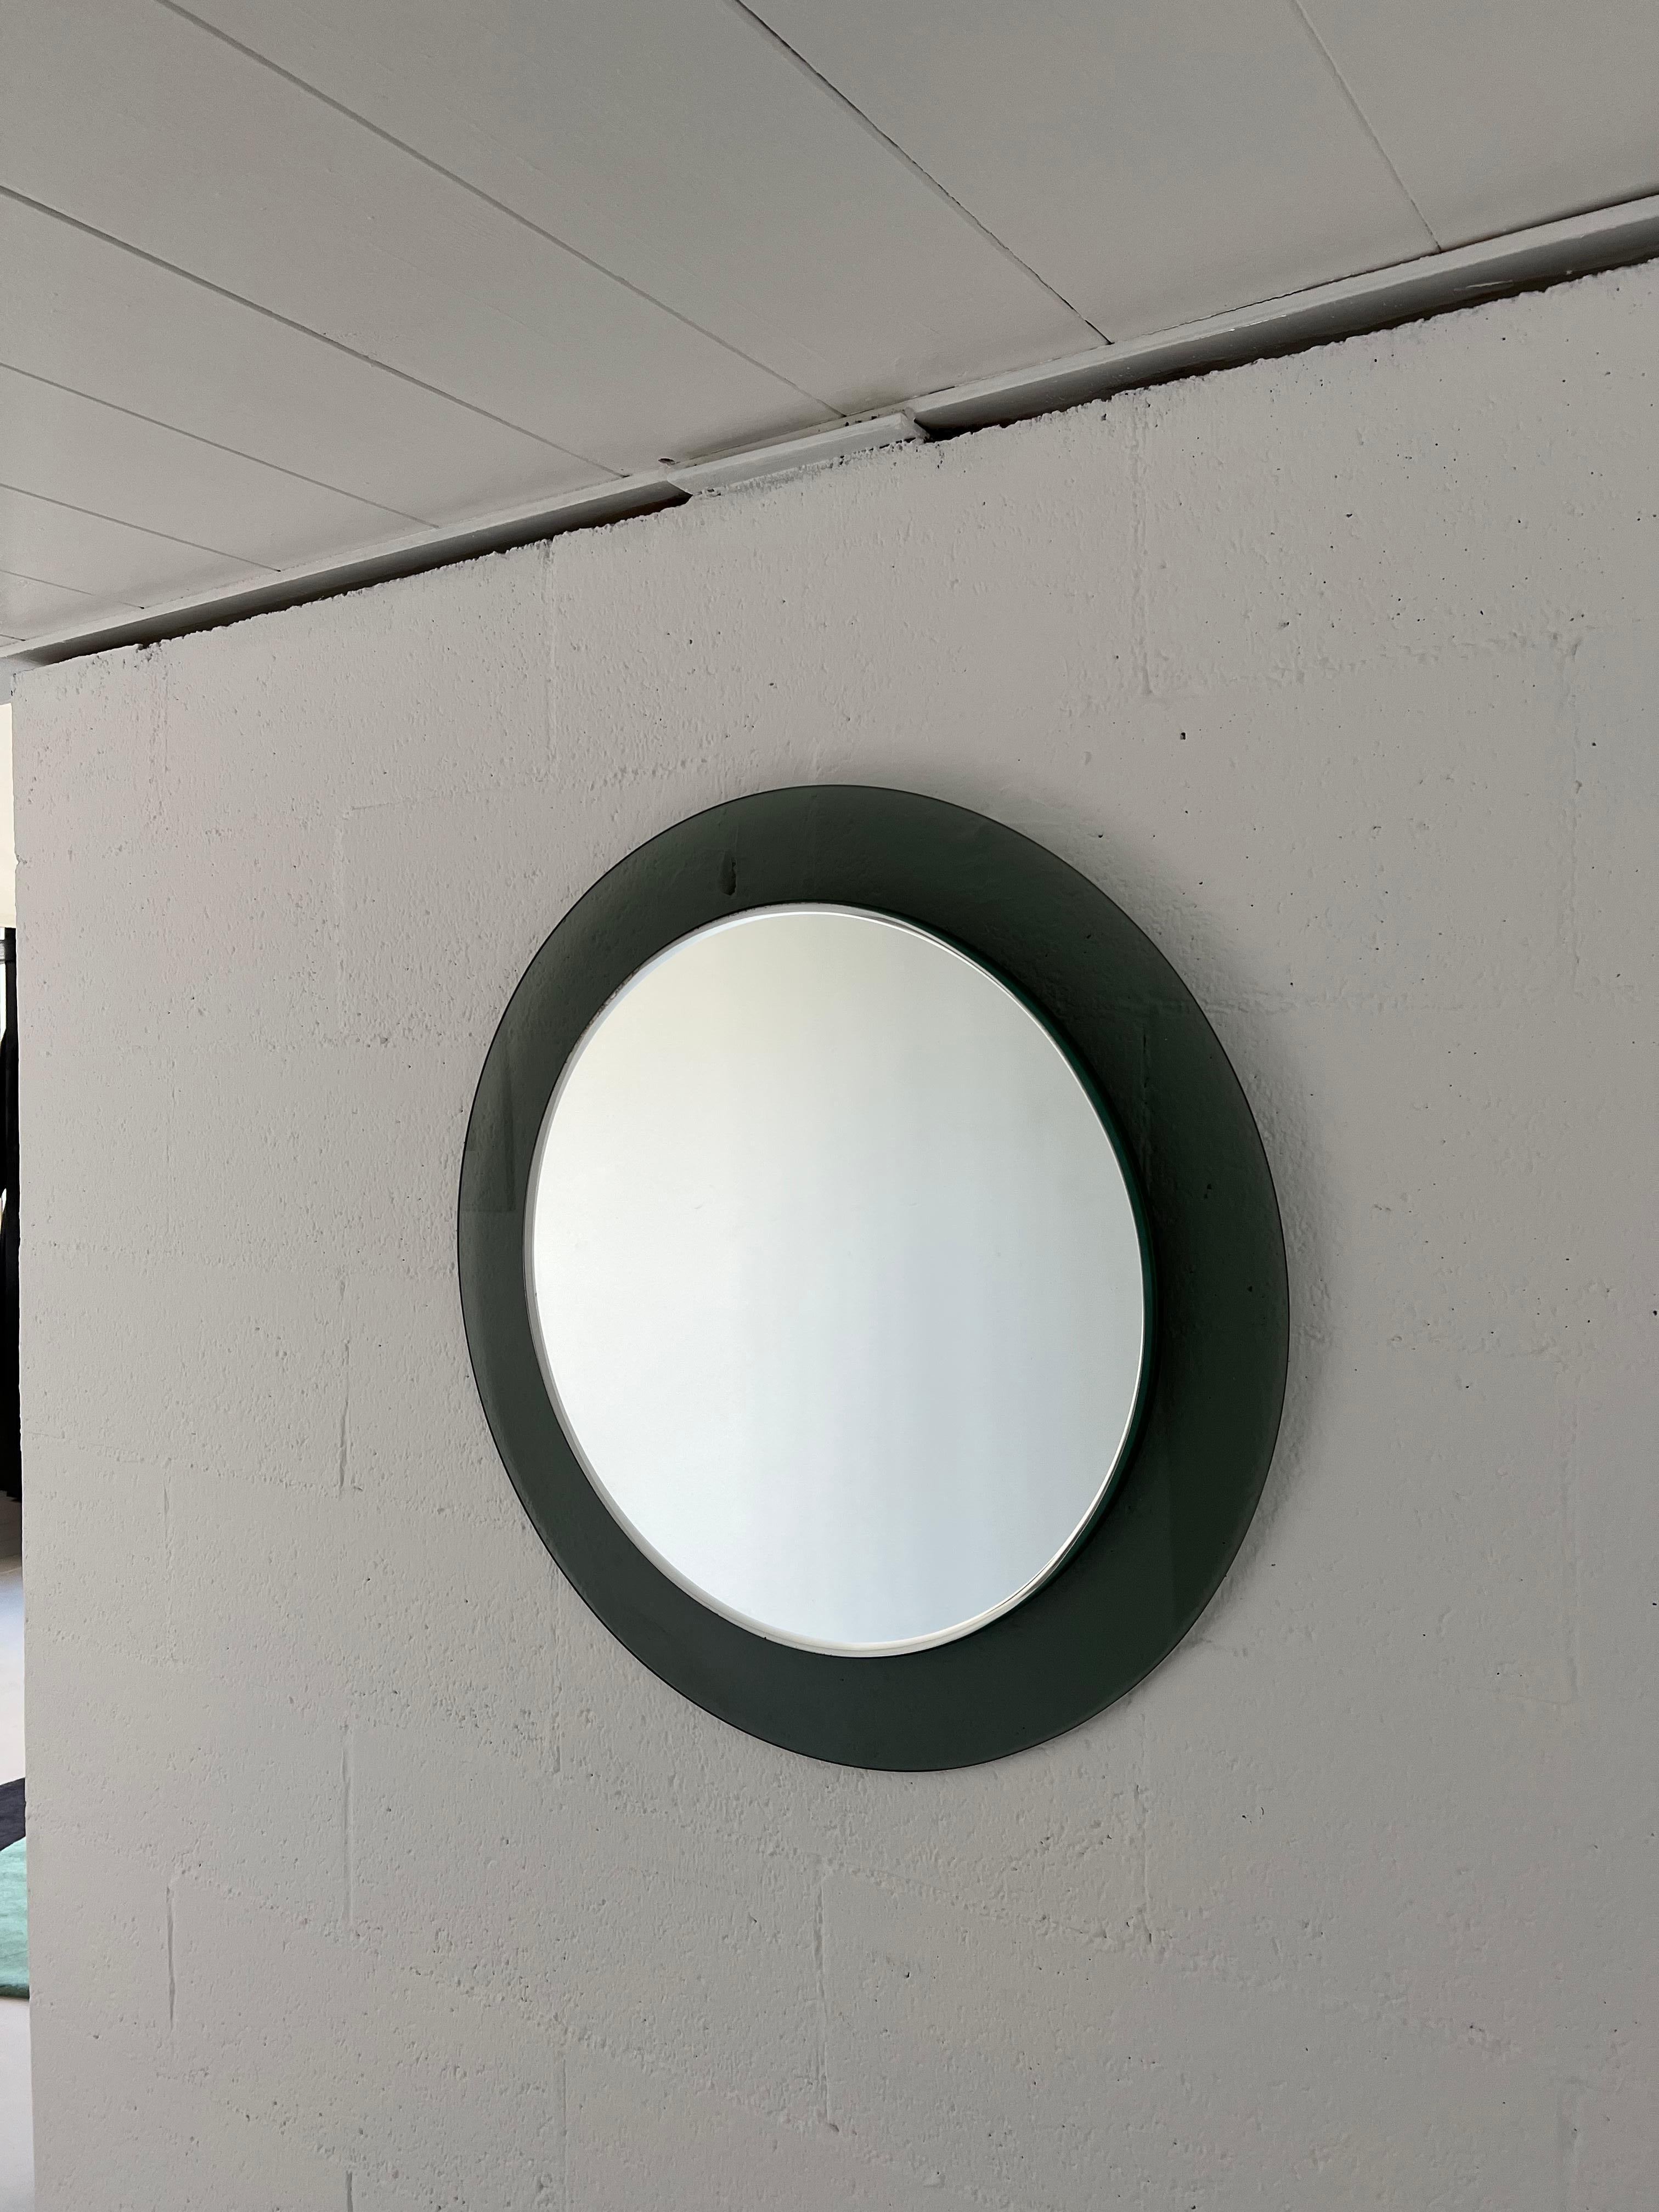 Offered for sale is a timeless, elegant and extremely sleek wall mounted mirror. Round in shape, and entirely made of glass - with a beveled mirror disc attached over a wider circular back in smoked glass, it is minimal yet highly attractive.

It is